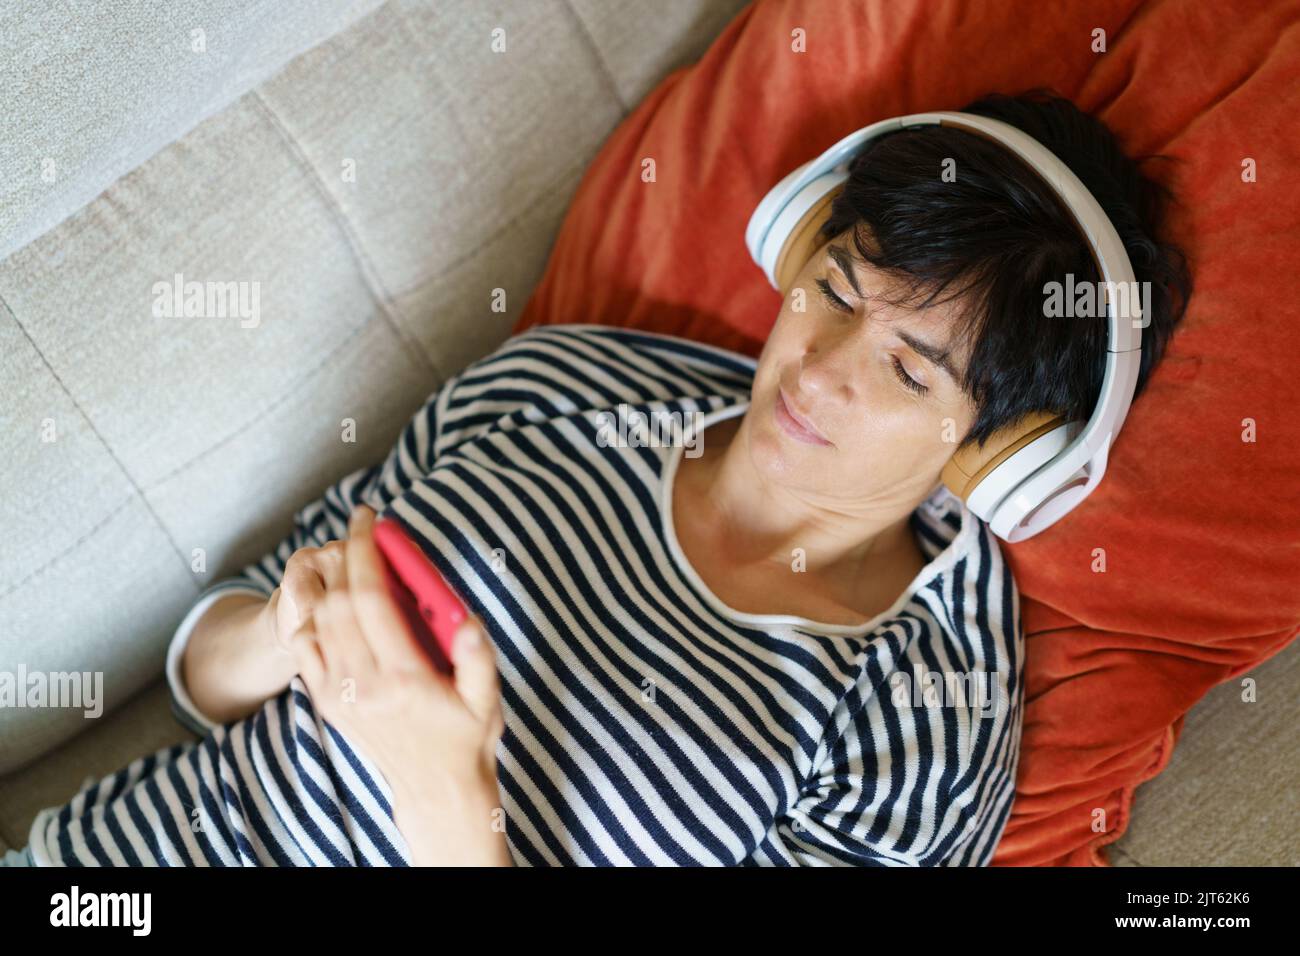 Woman consulting her smartphone while listening to music with headphones lying on the sofa. Stock Photo